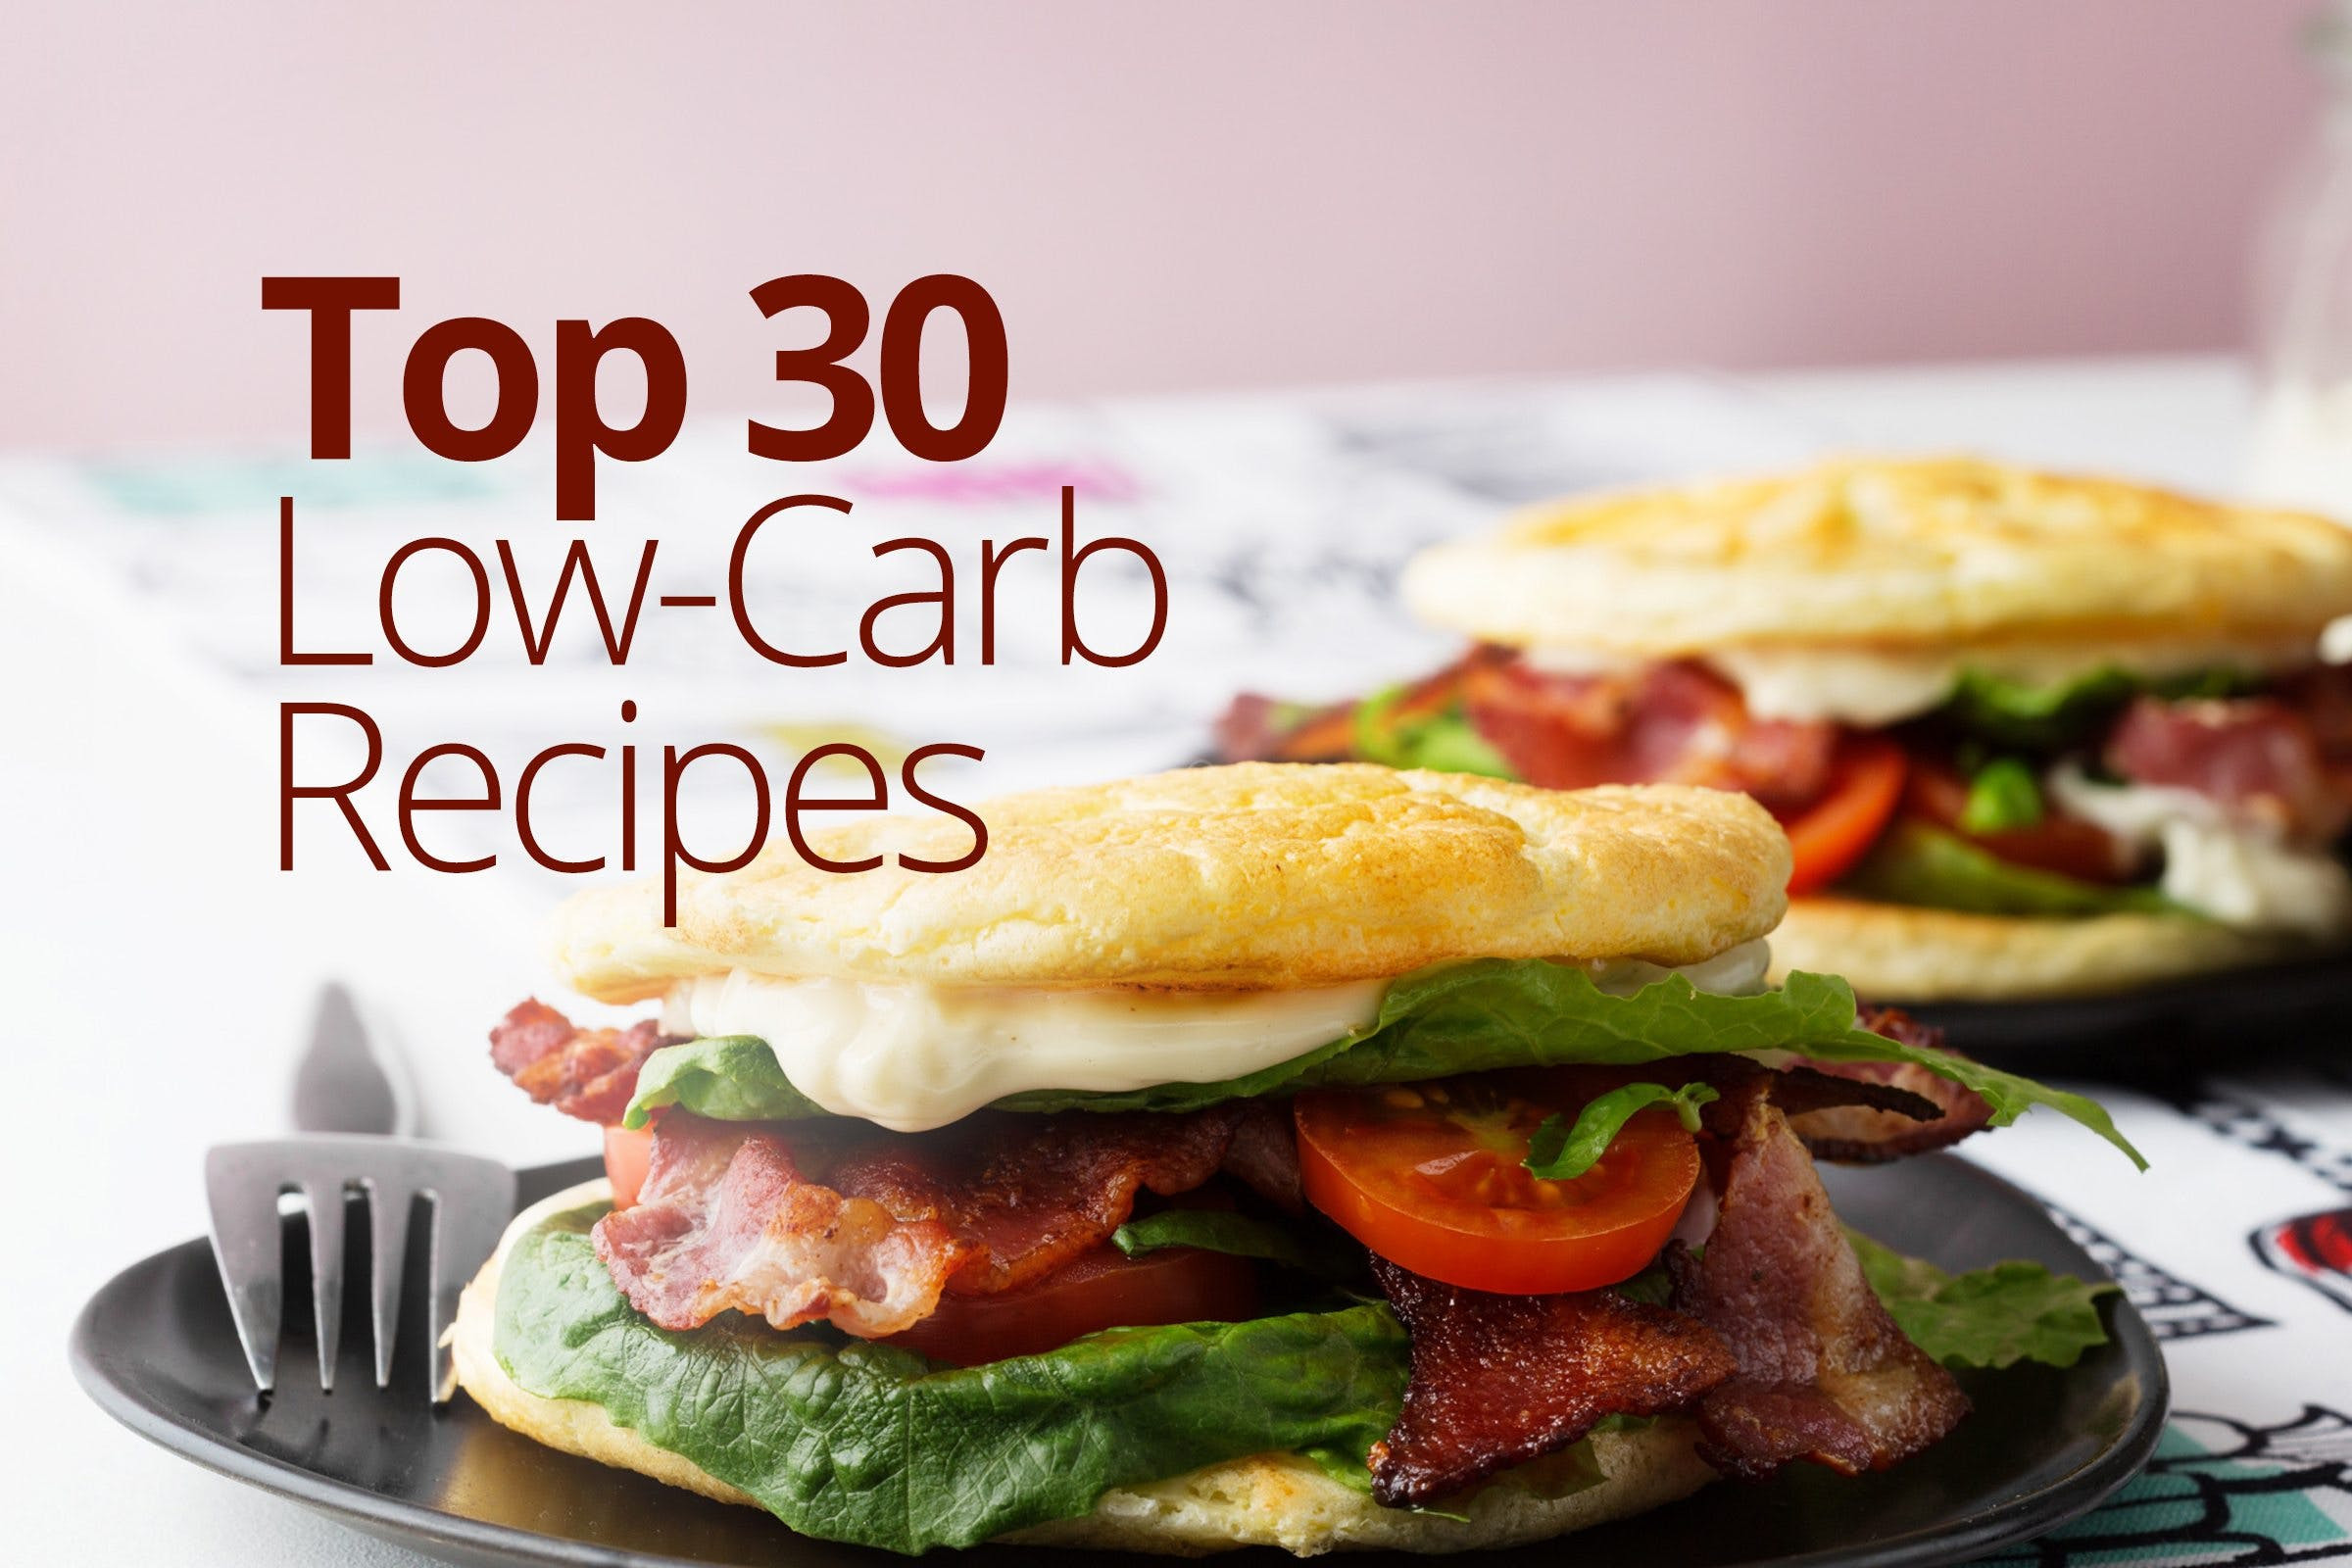 Diet Doctor Low Carb Recipes
 Top 30 Low Carb Recipes Simple & Delicious Inspiration